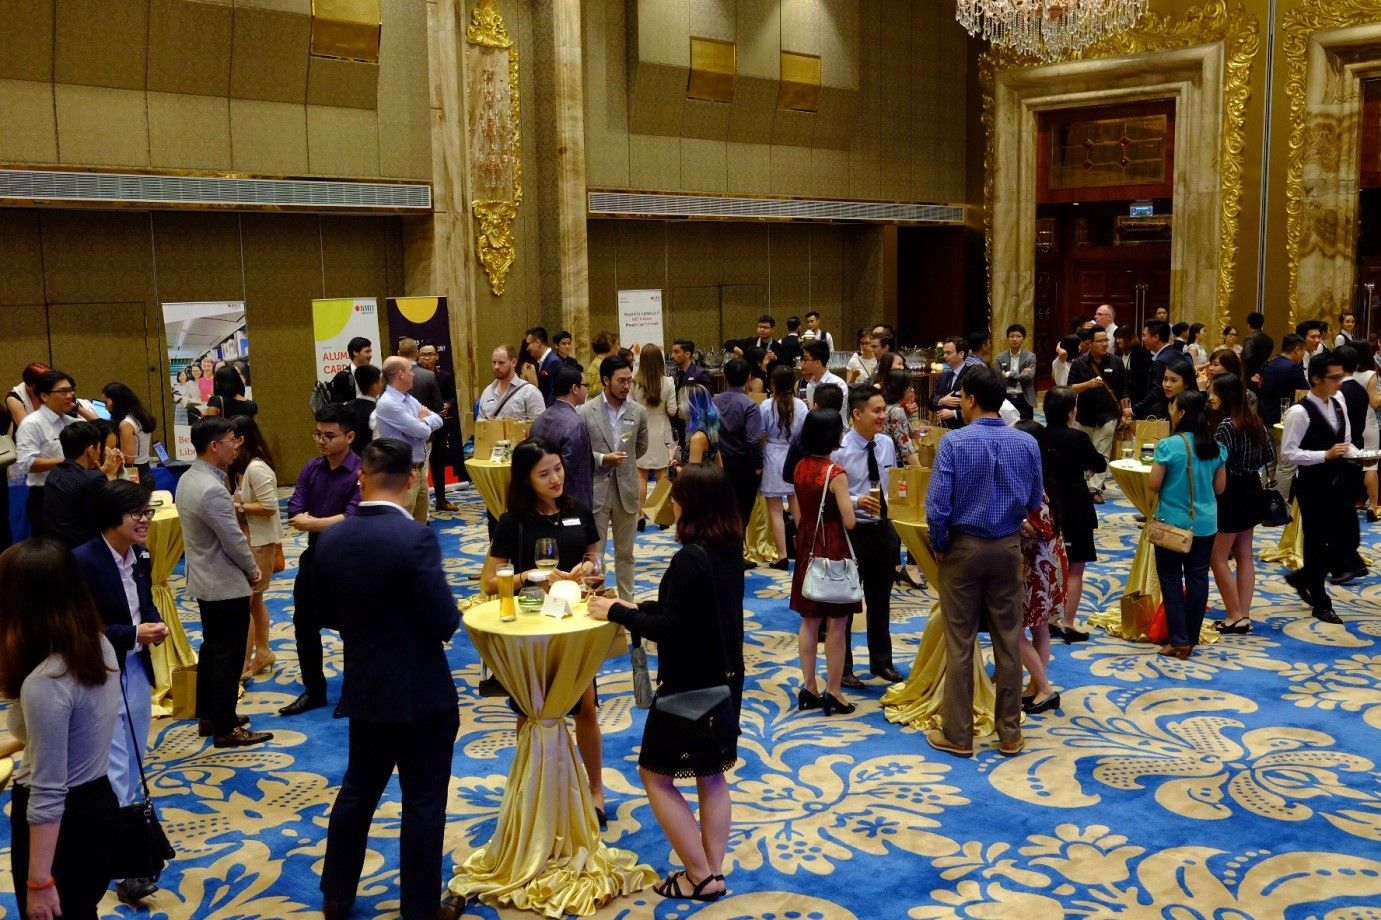 More than 200 alumni, industry representatives, and staff gathered at the Reverie Hotel in Ho Chi Minh City for the launch of the HCMC Business Alumni chapter.